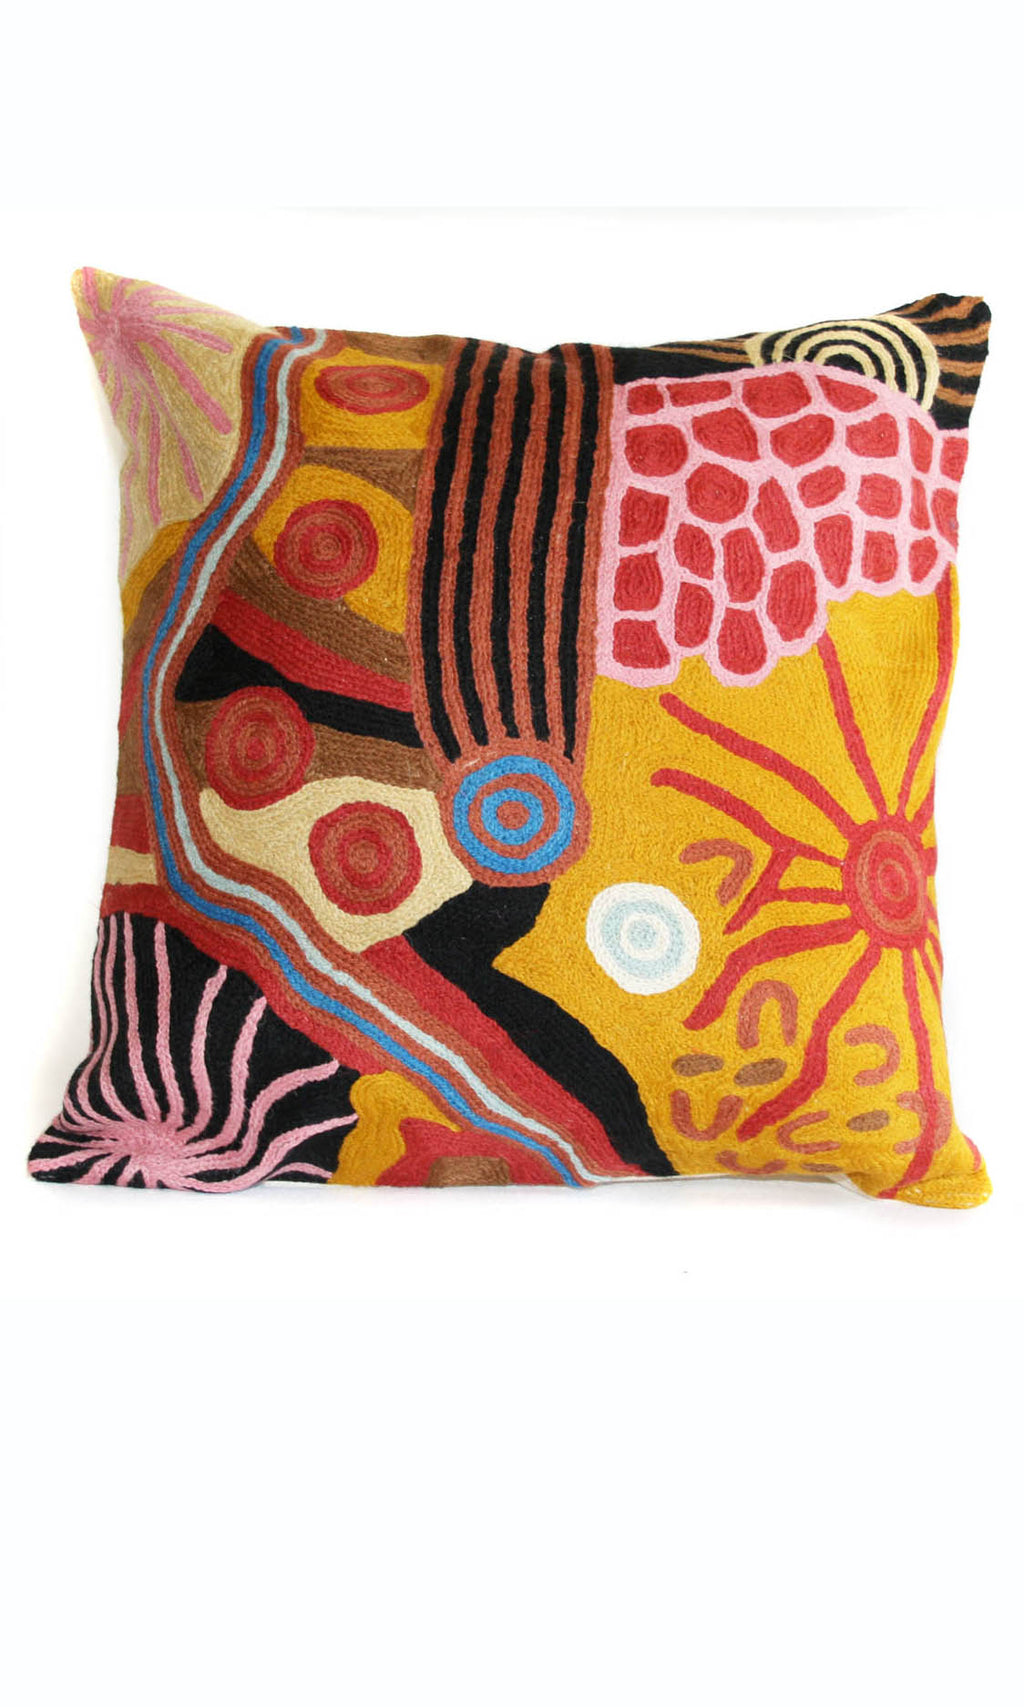 Aboriginal Art Cushion Cover by Damien & Yilpi Marks (3)